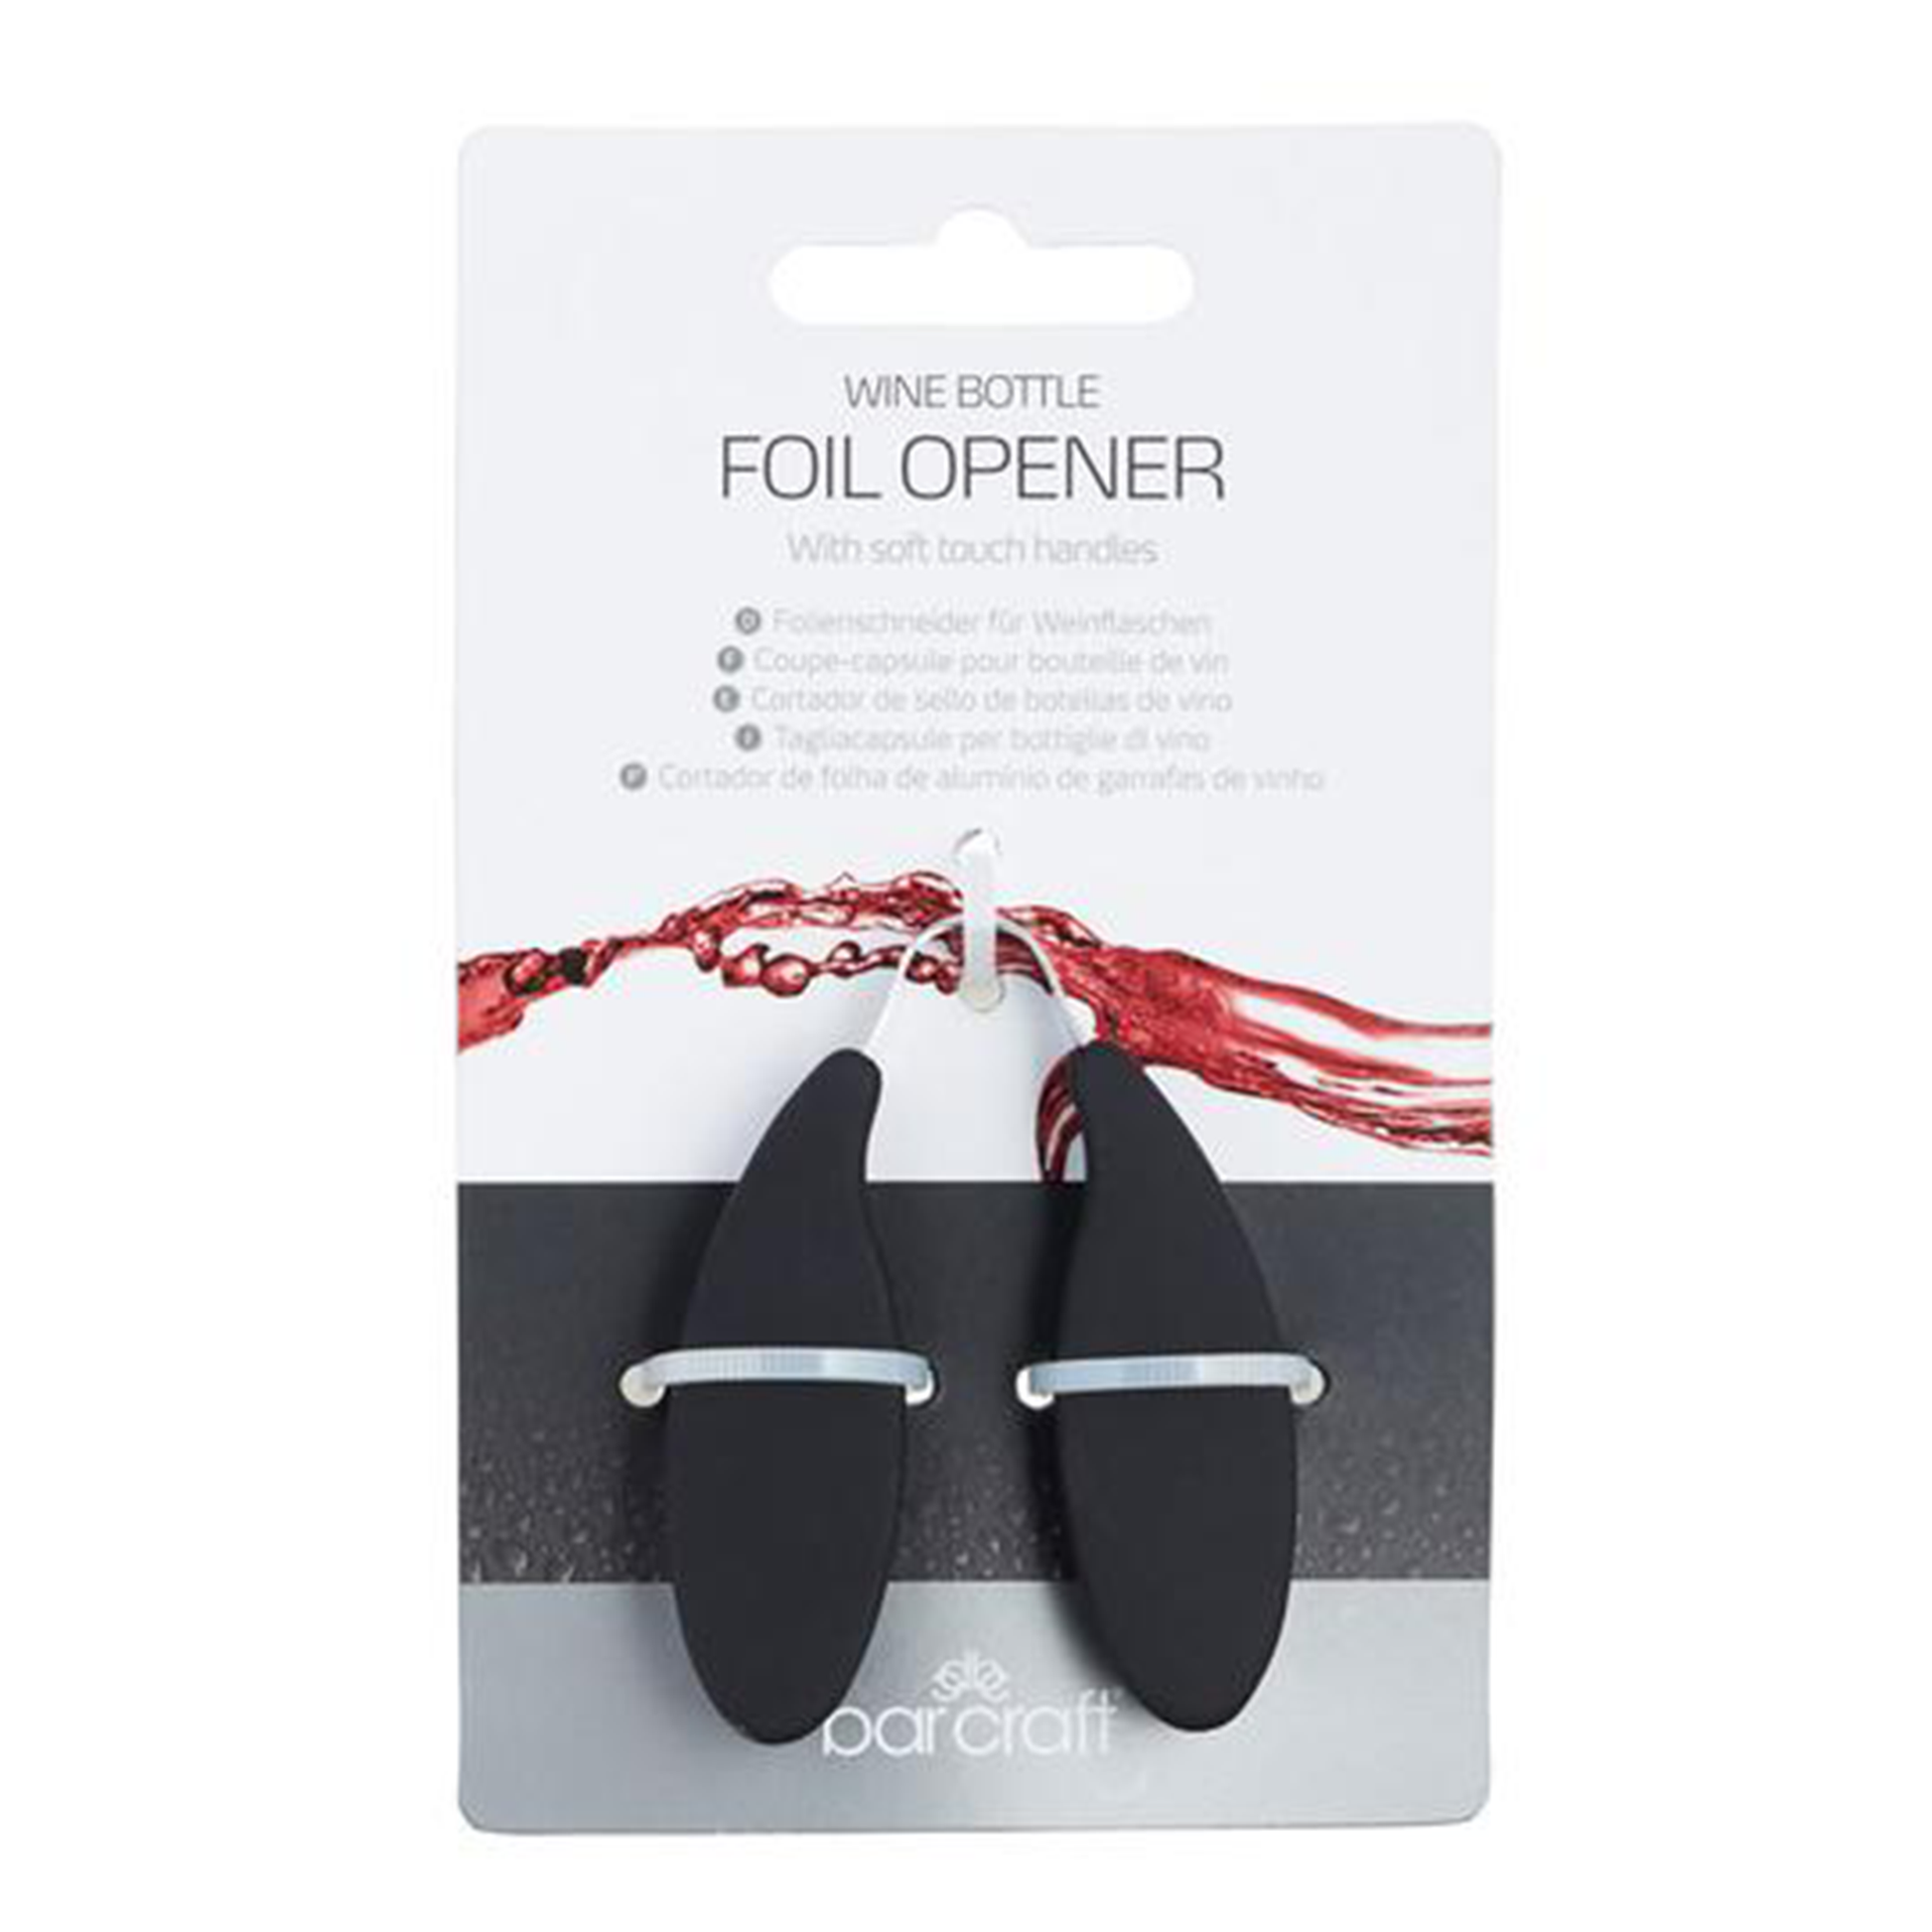 the foil opener on it's display card